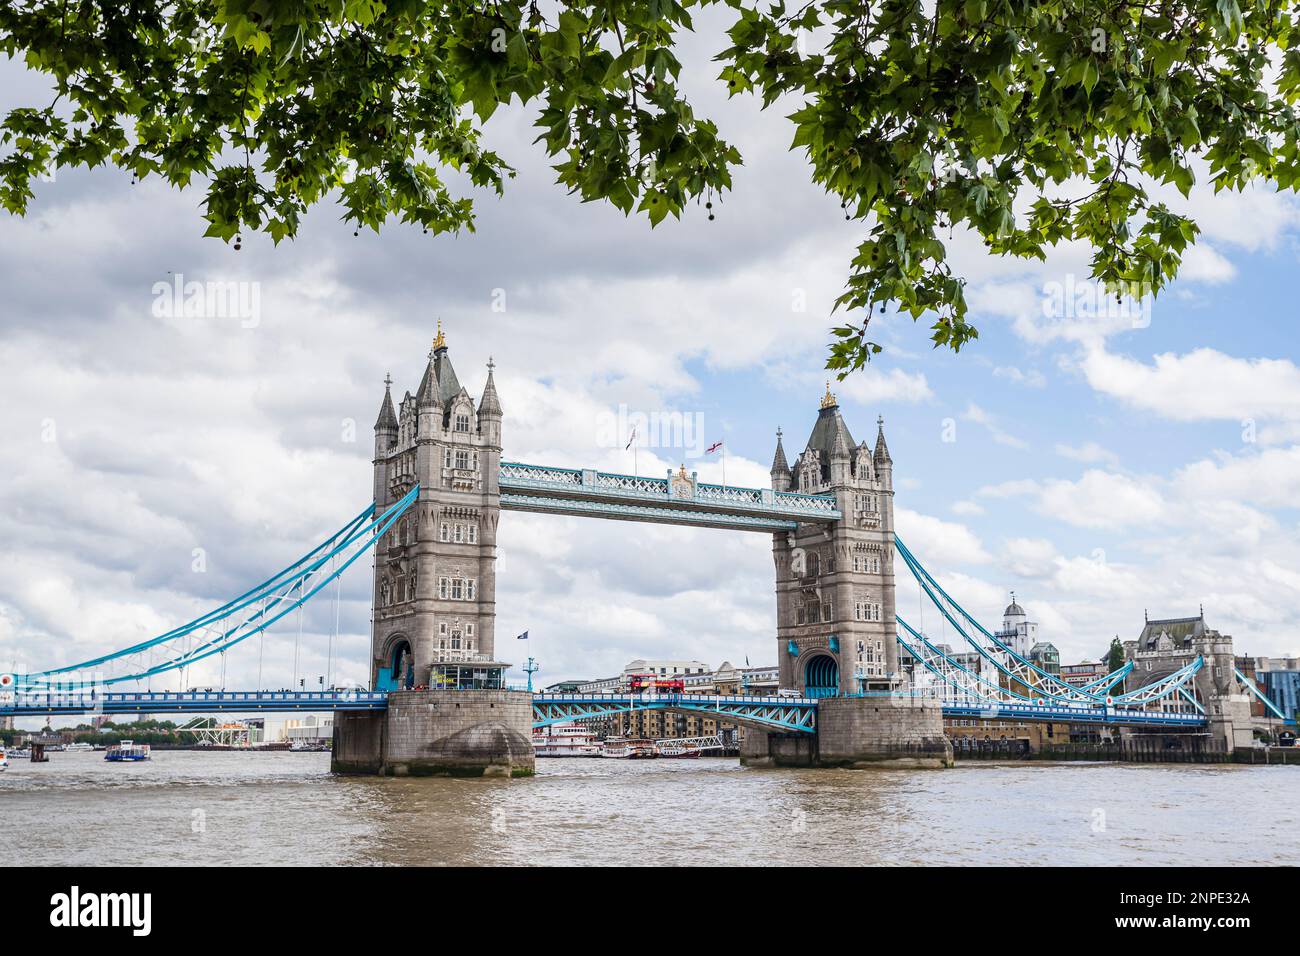 Tower Bridge spanning the River Thames in London seen under a frame of trees from the Northbank . Stock Photo